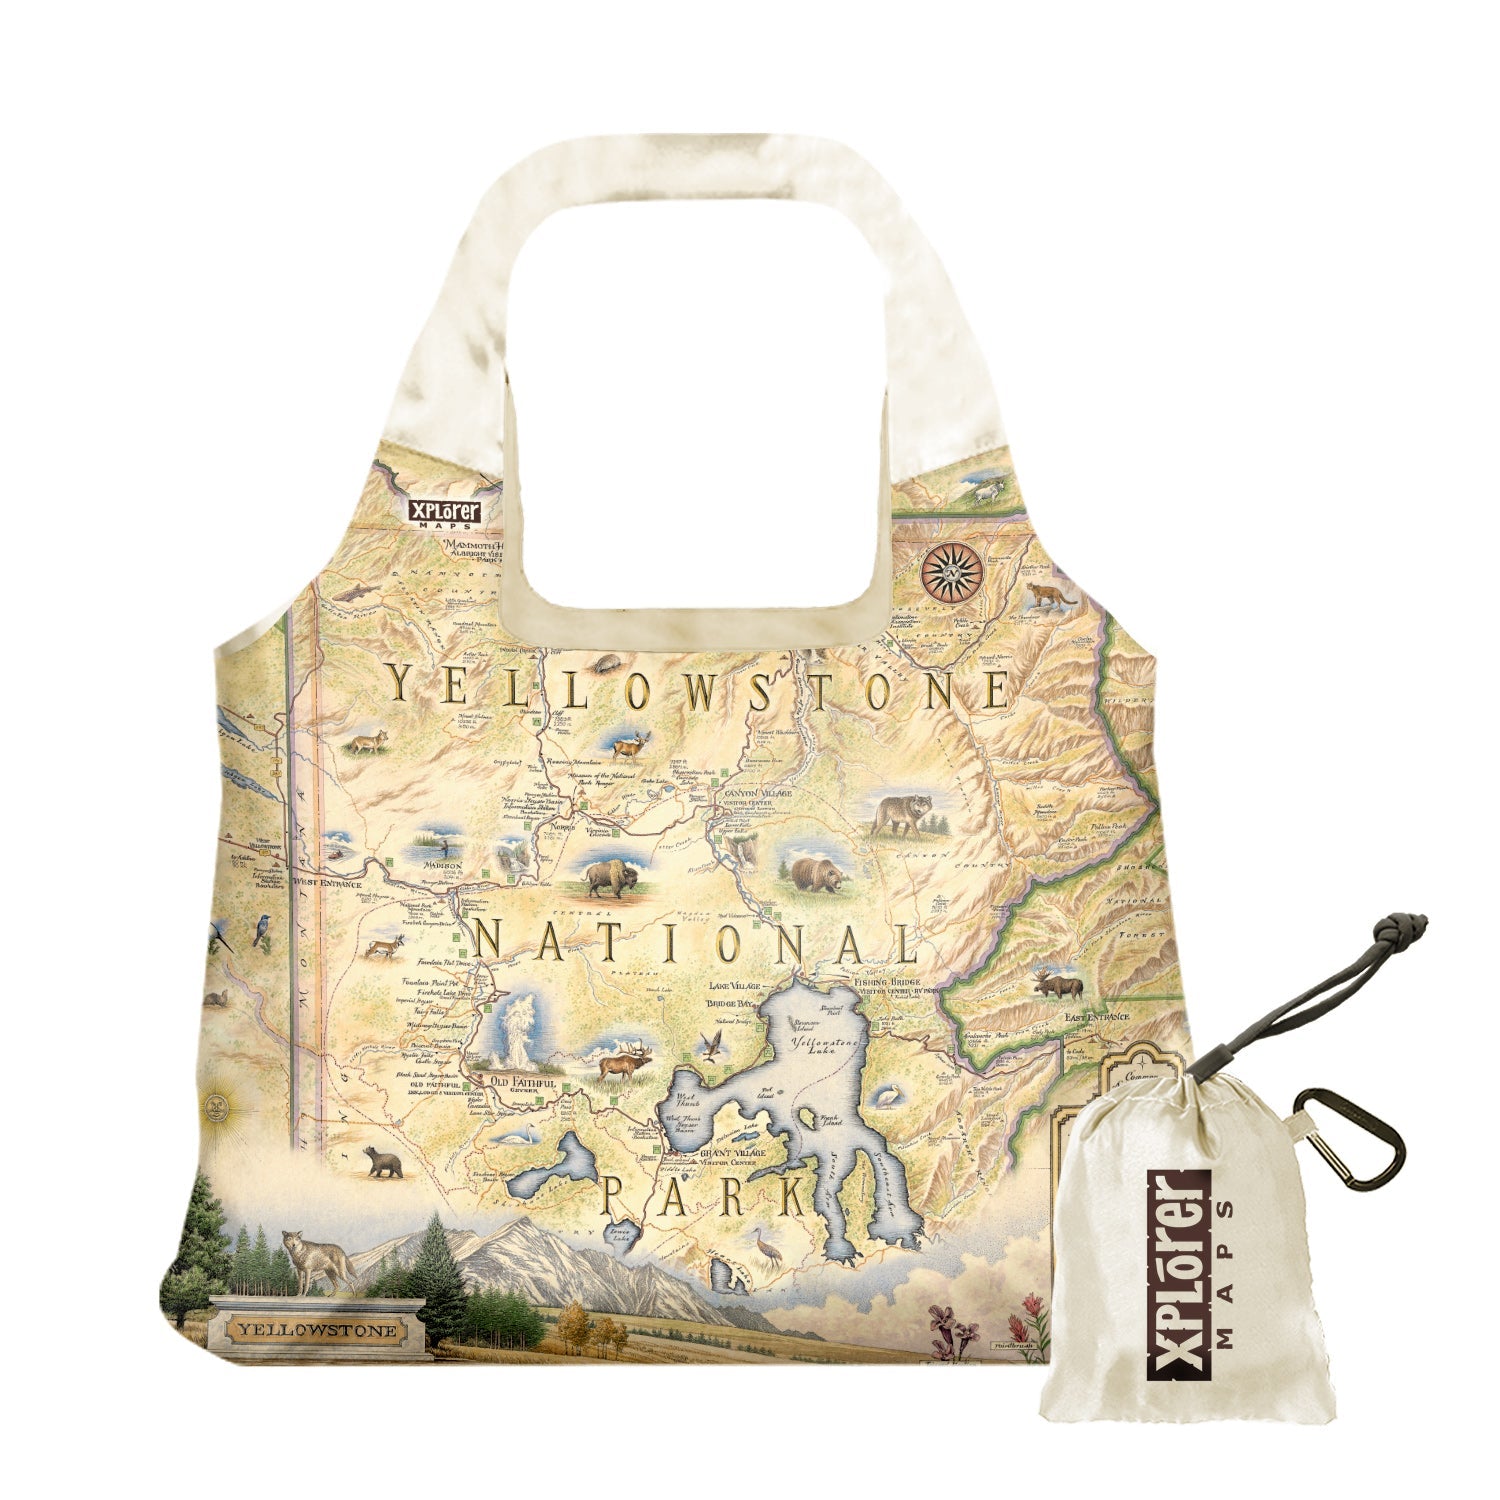 Yellowstone National Park Map Pouch Tote Bags by Xplorer Maps. The map features illustrations of places such as Yellowstone Lake, Old Faithful, and Roosevelt Tower. Flora and fauna include mountain lions, world, grizzly bears, fireweed, and lupine.